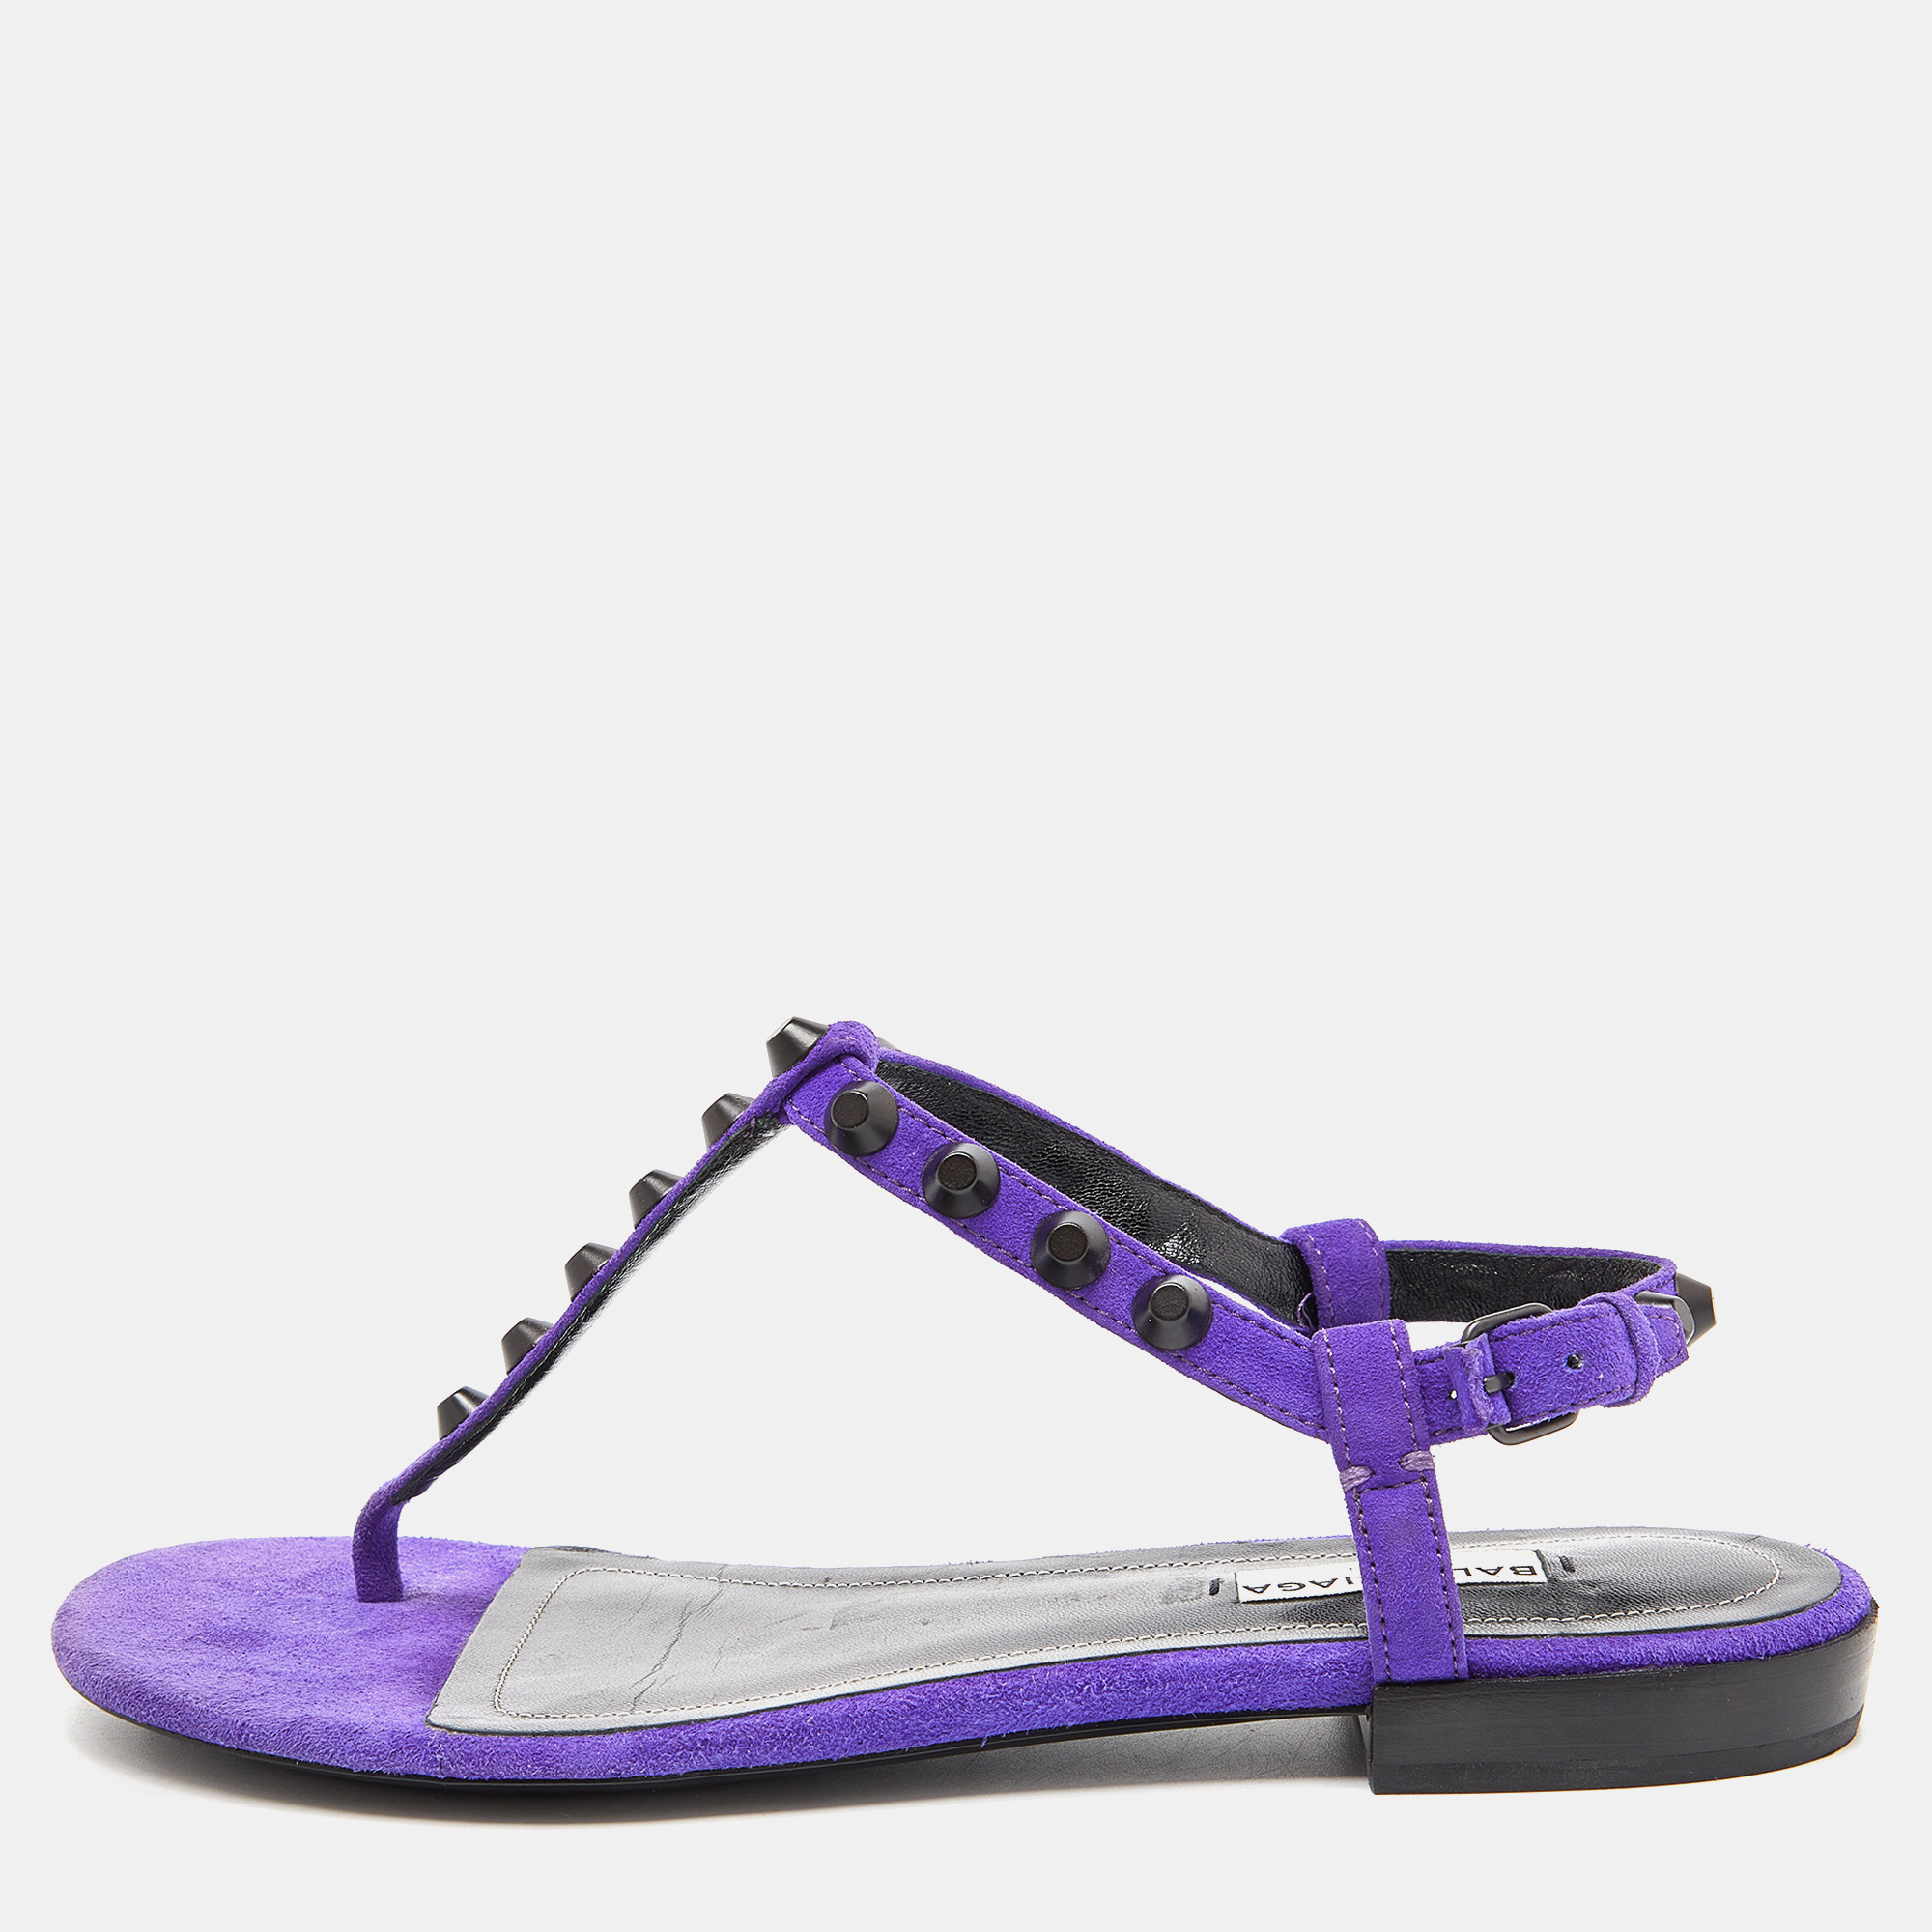 Balenciaga purple suede arena studded thong sandals size 38.5